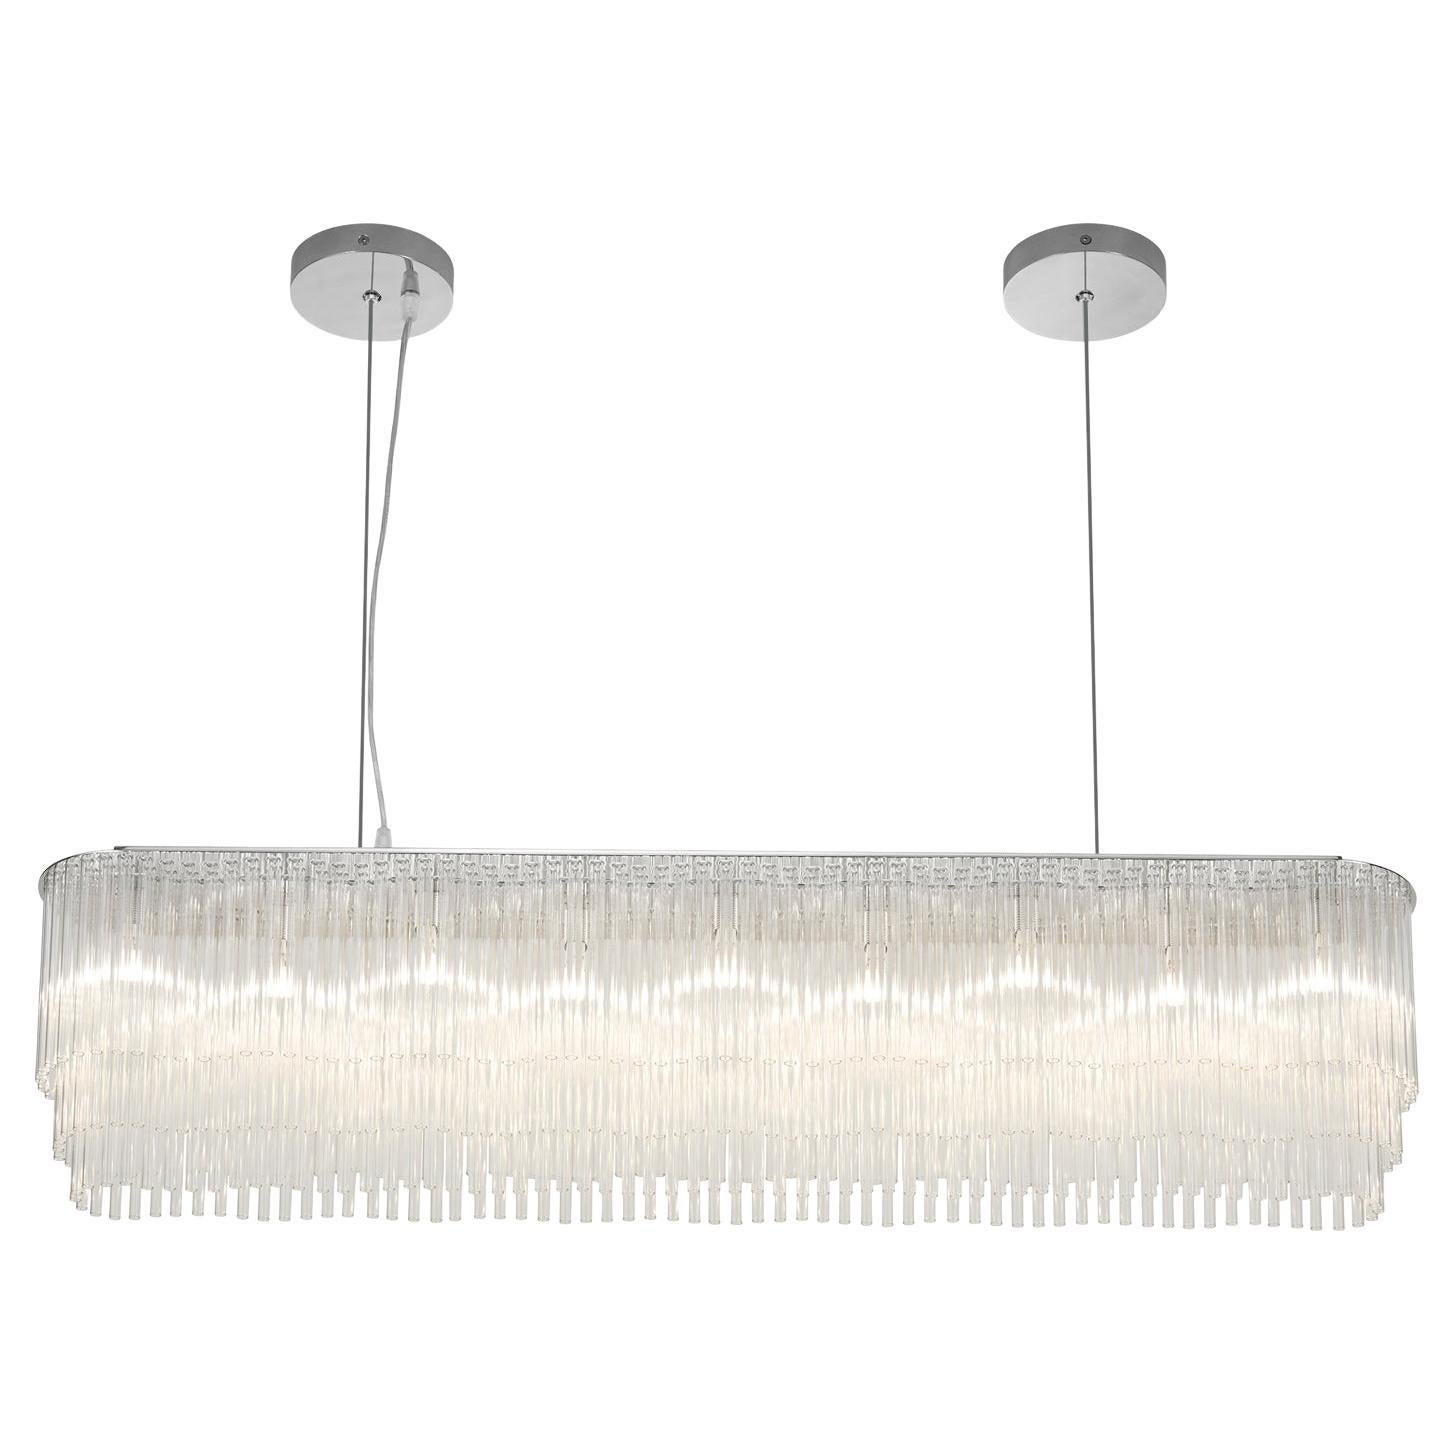 Linear Chandelier Thin 1010mm/39.75" in Polished Chrome / Tiered Glass Profile For Sale